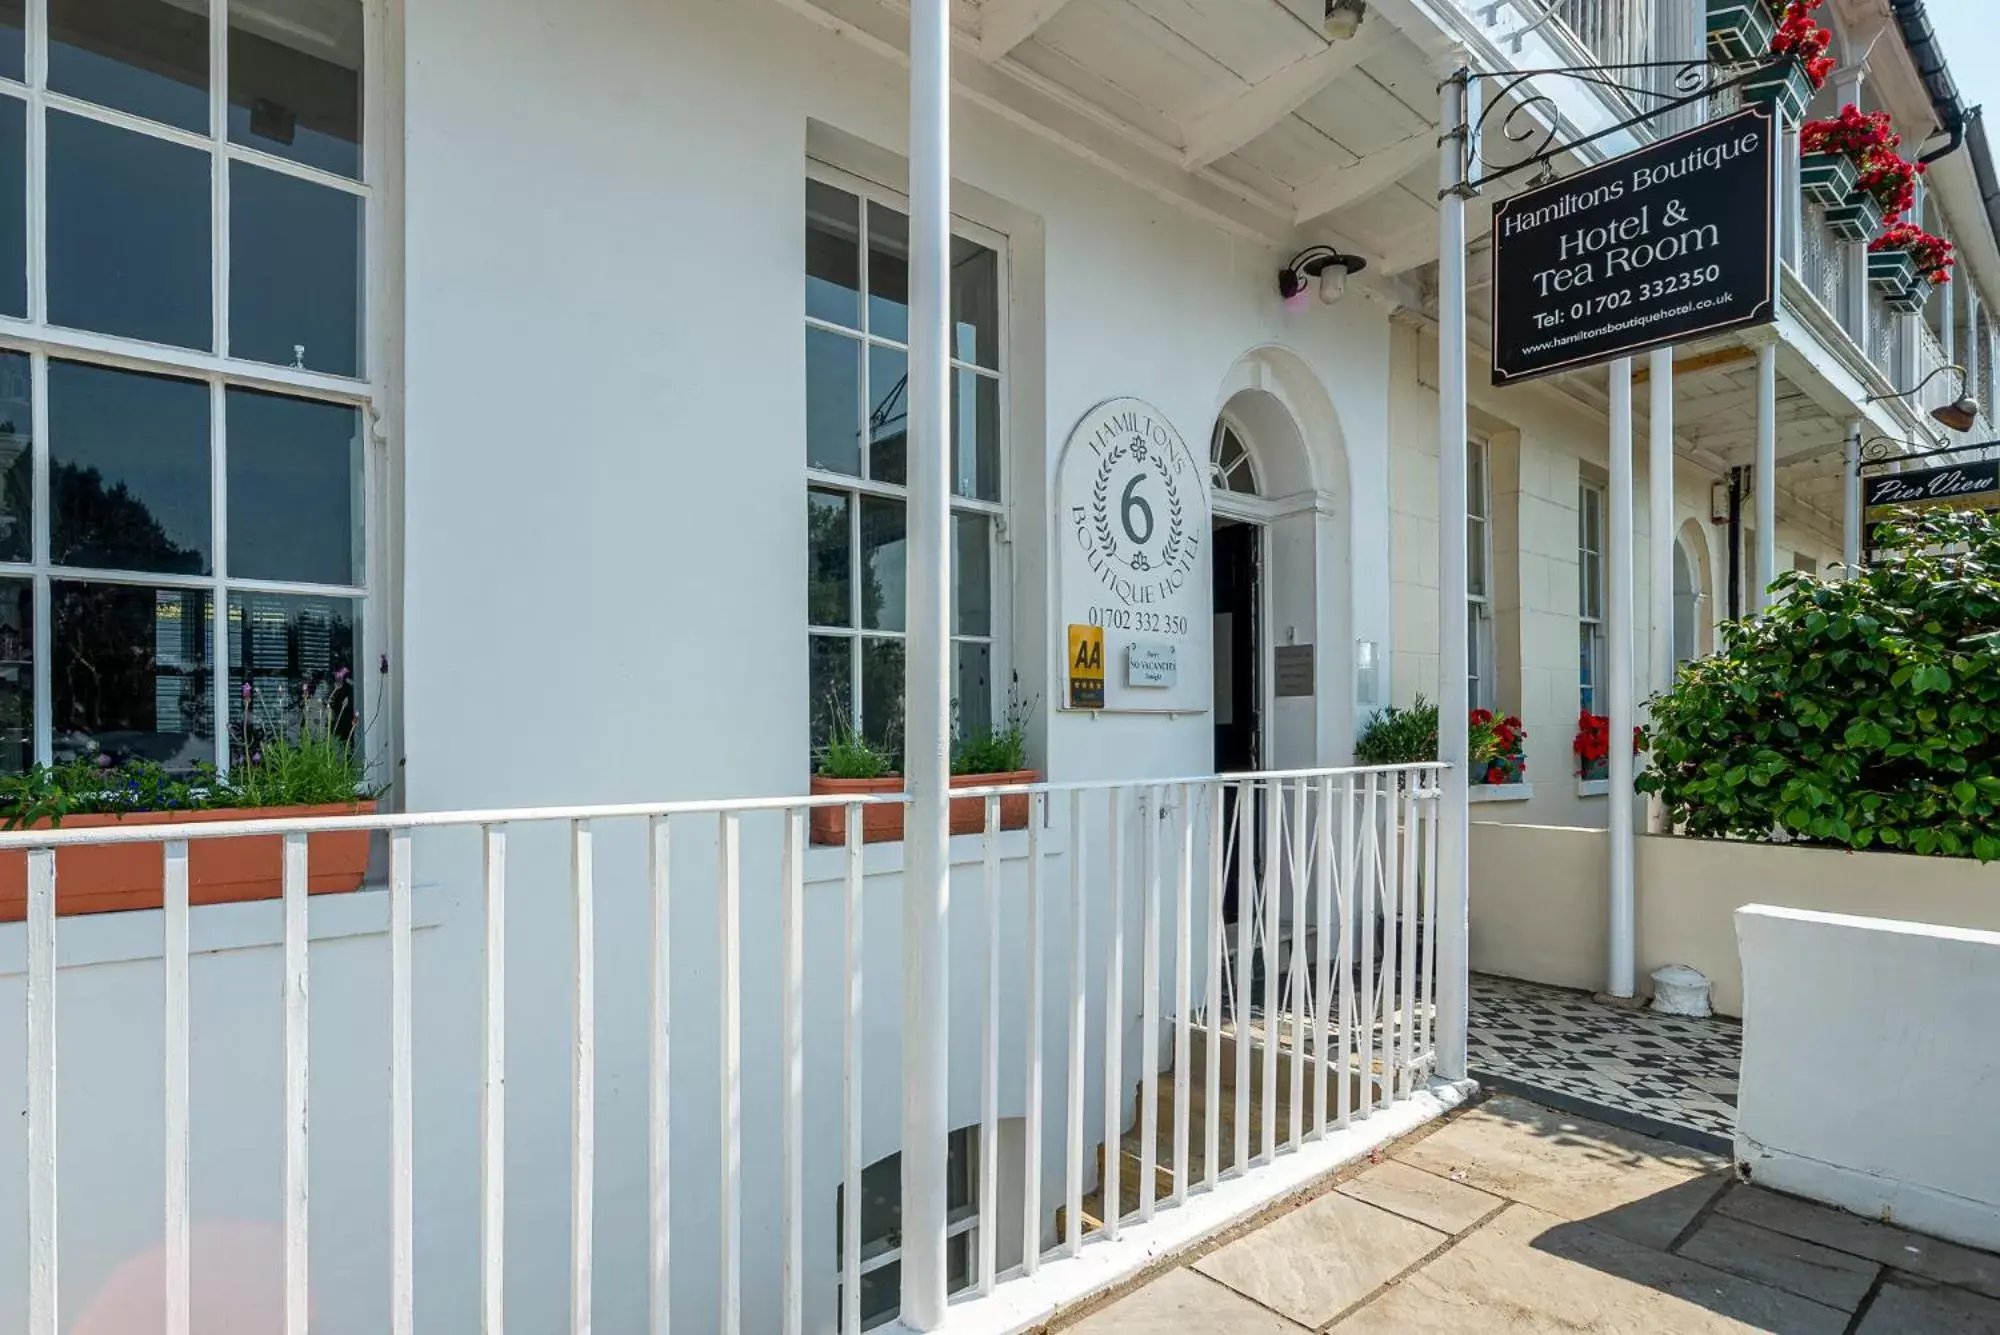 Property building in Hamiltons Boutique Hotel